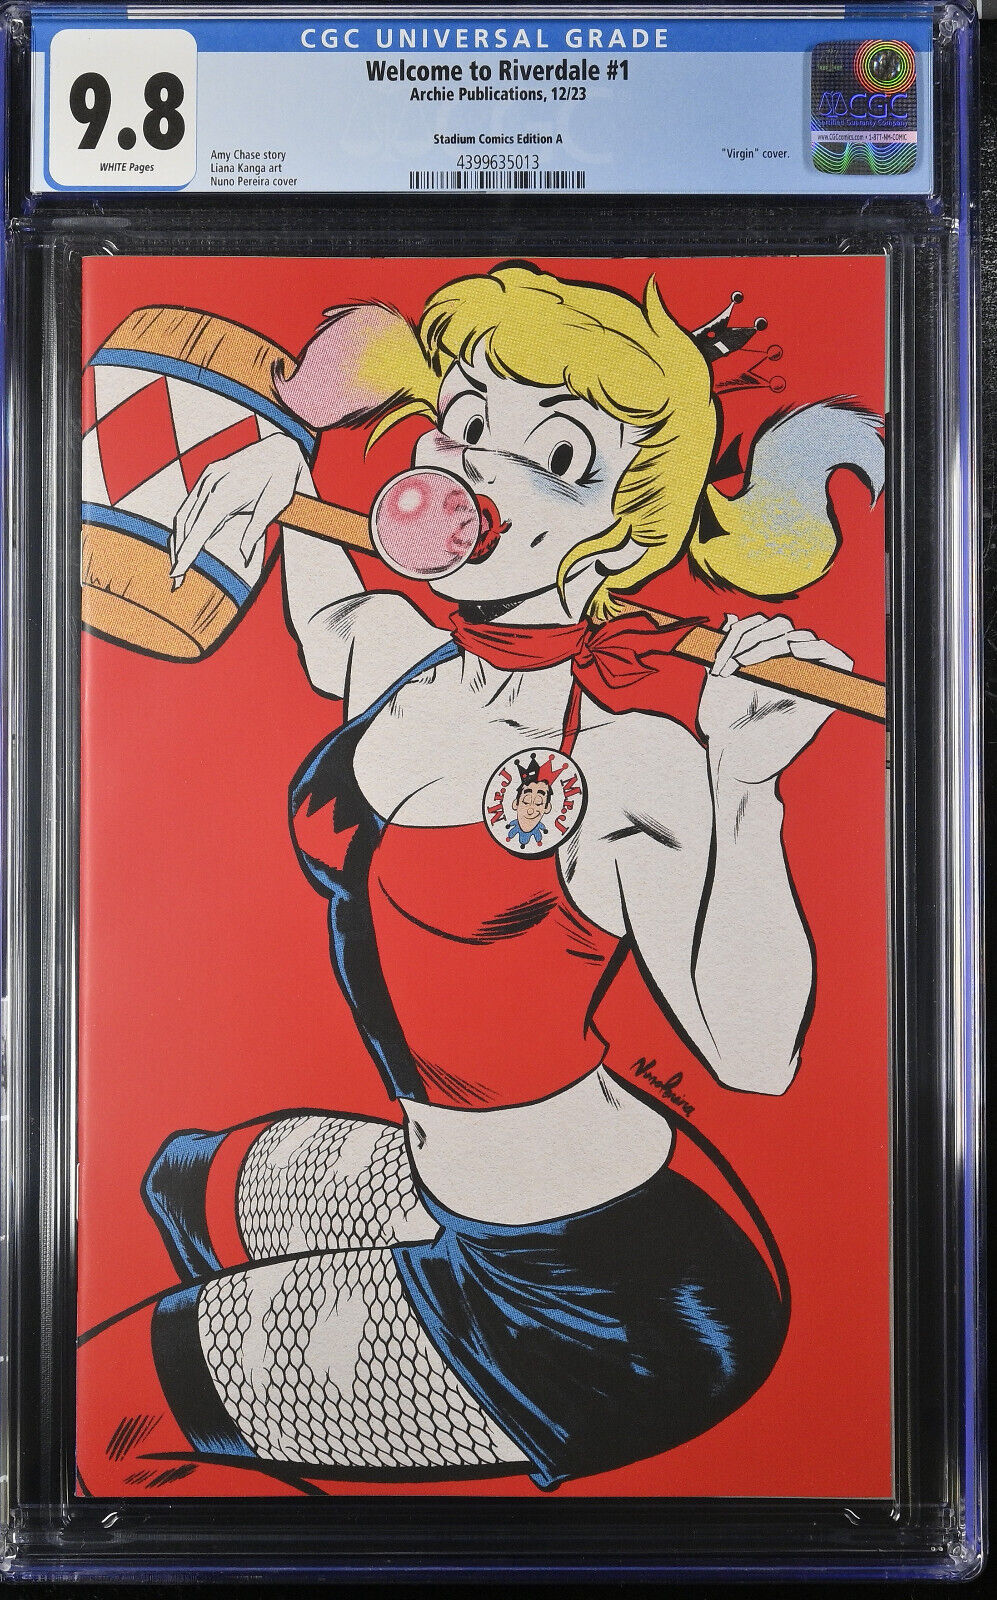 Chilling Adv: Welcome to Riverdale #1 Nuno Pereira Harley Quinn Variant CGC 9.8